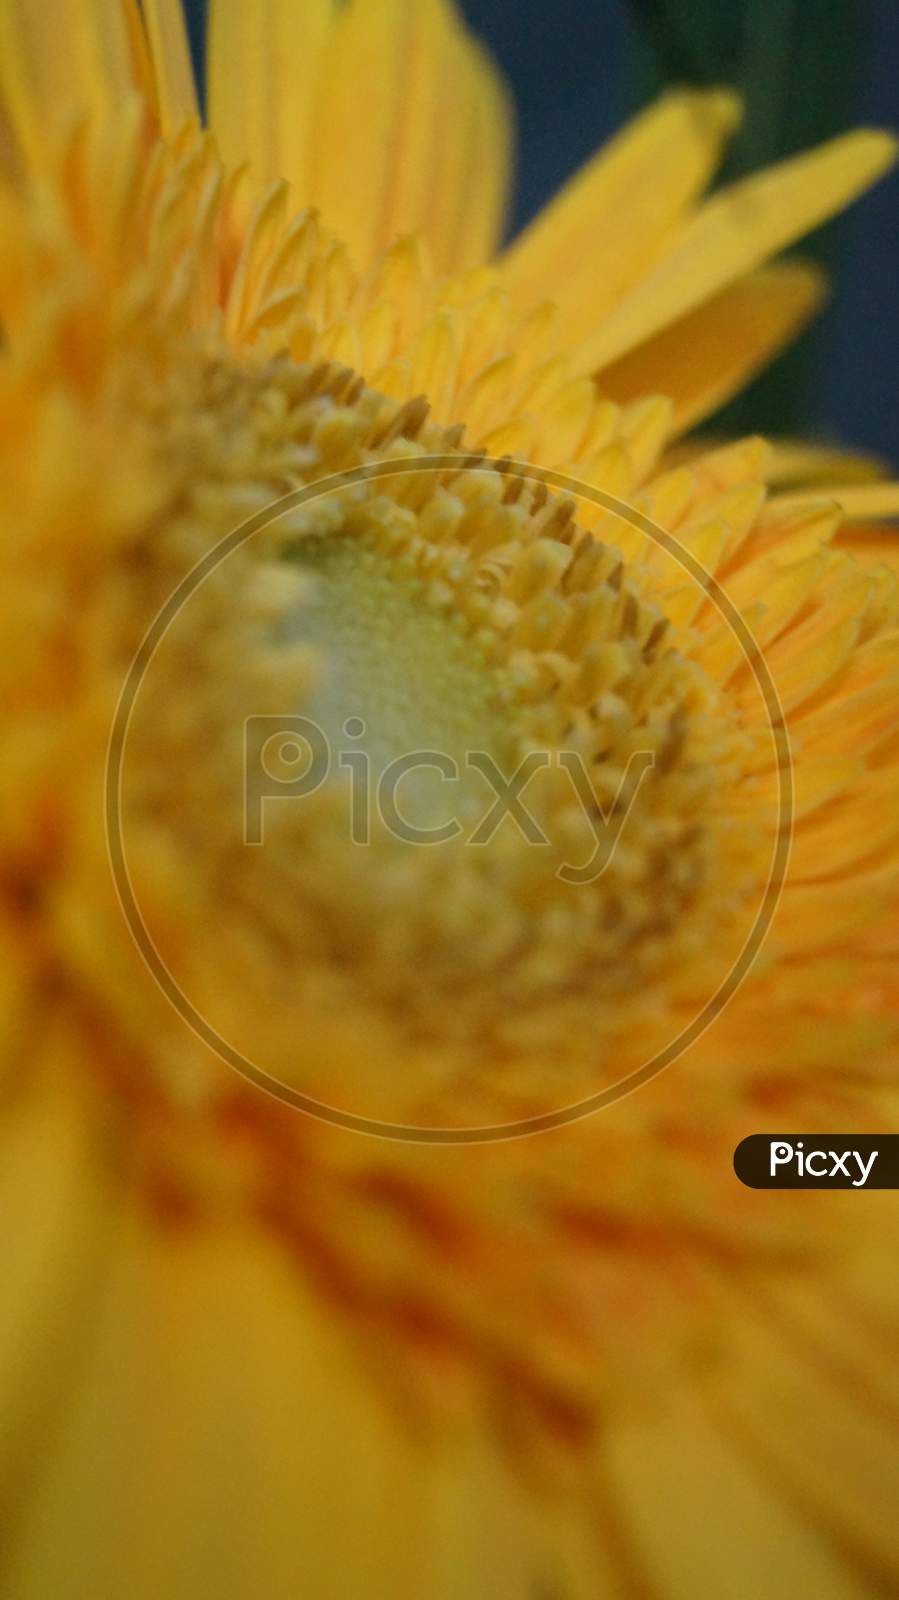 This photo is drawn from microlens, it is a photo of a flower.